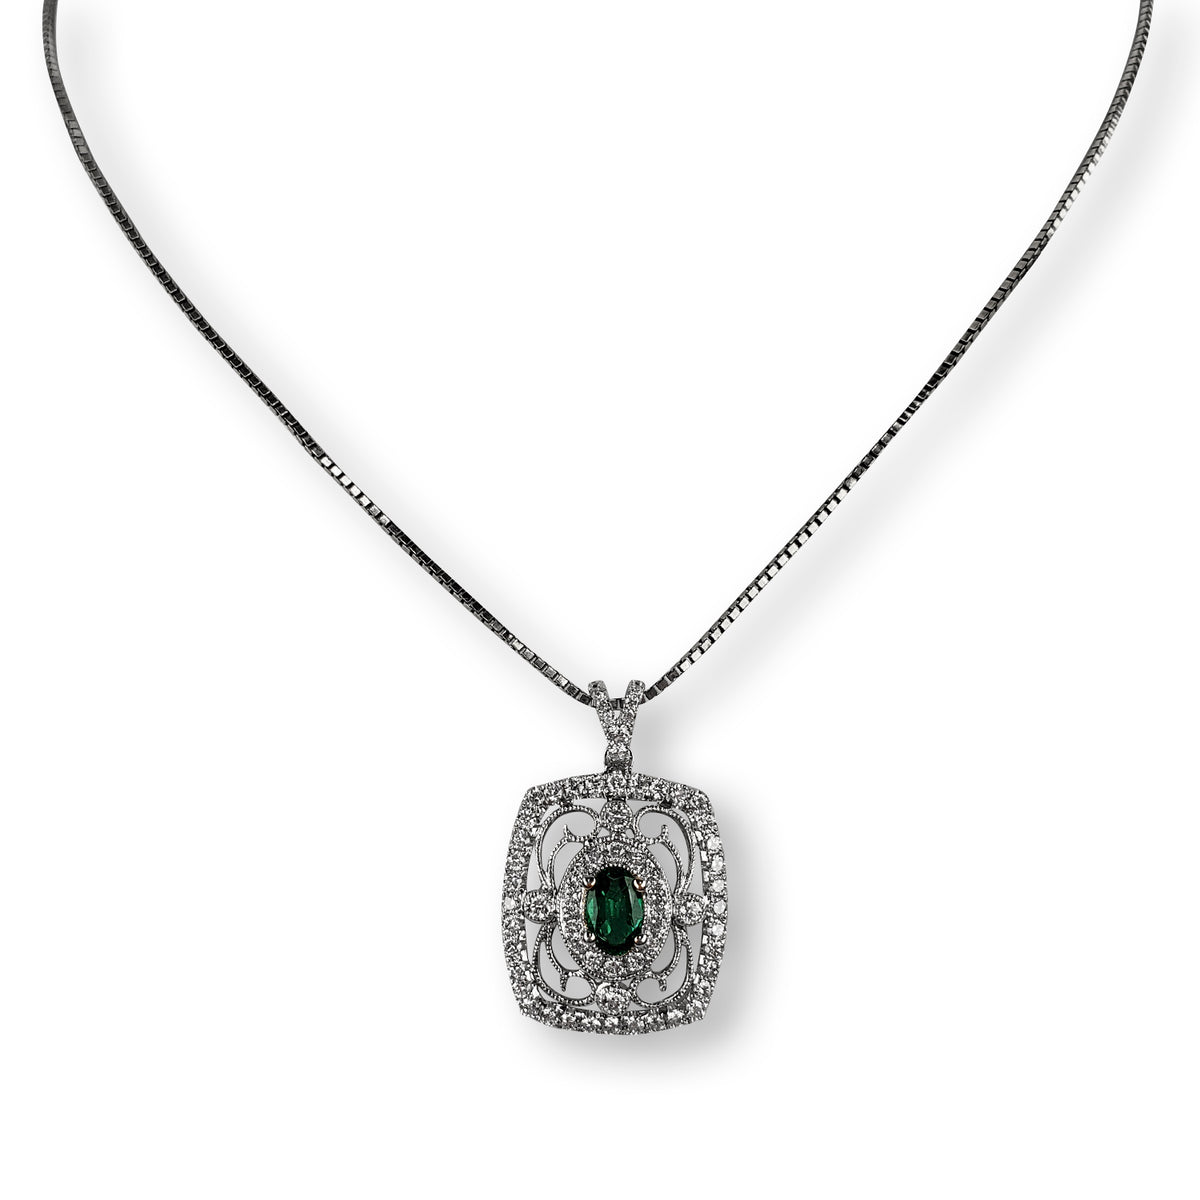 18kt White Gold Emerald and Diamond Pendant with 18kt White Gold Chain